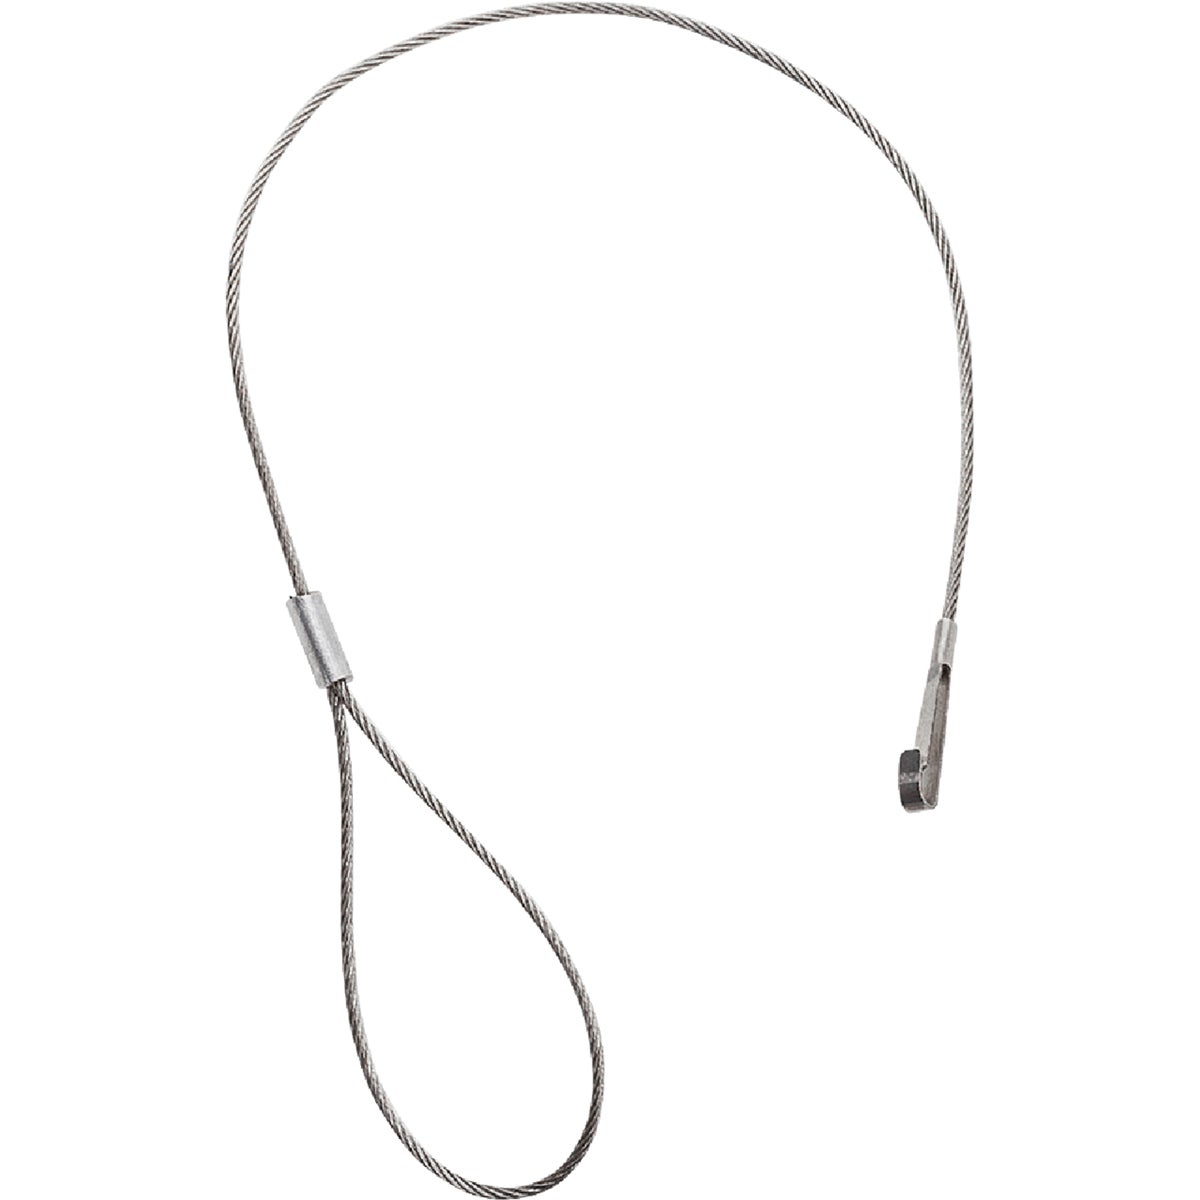 Item 201367, National catalog model No. V853 gate latch cable, stainless steel.